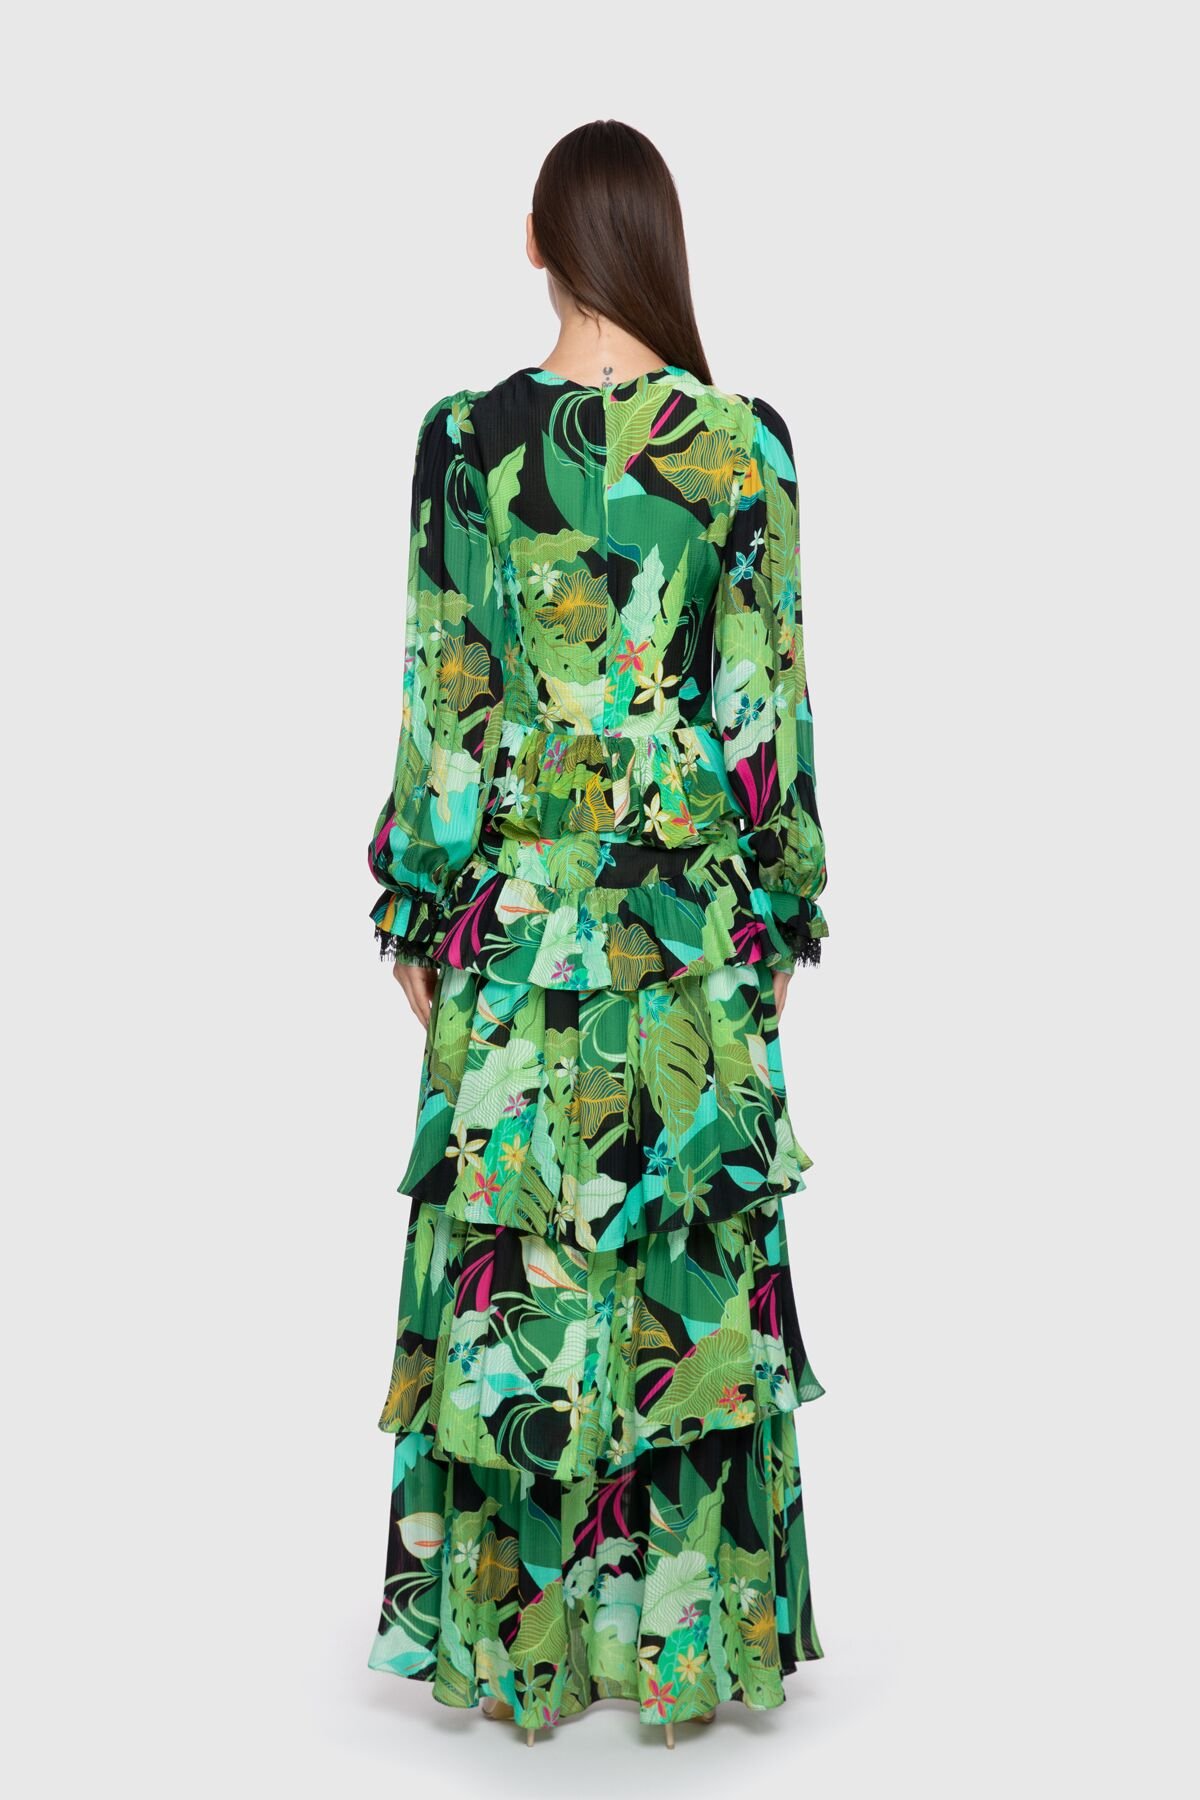 Embroidered Detailed Long Green Chiffon Dress